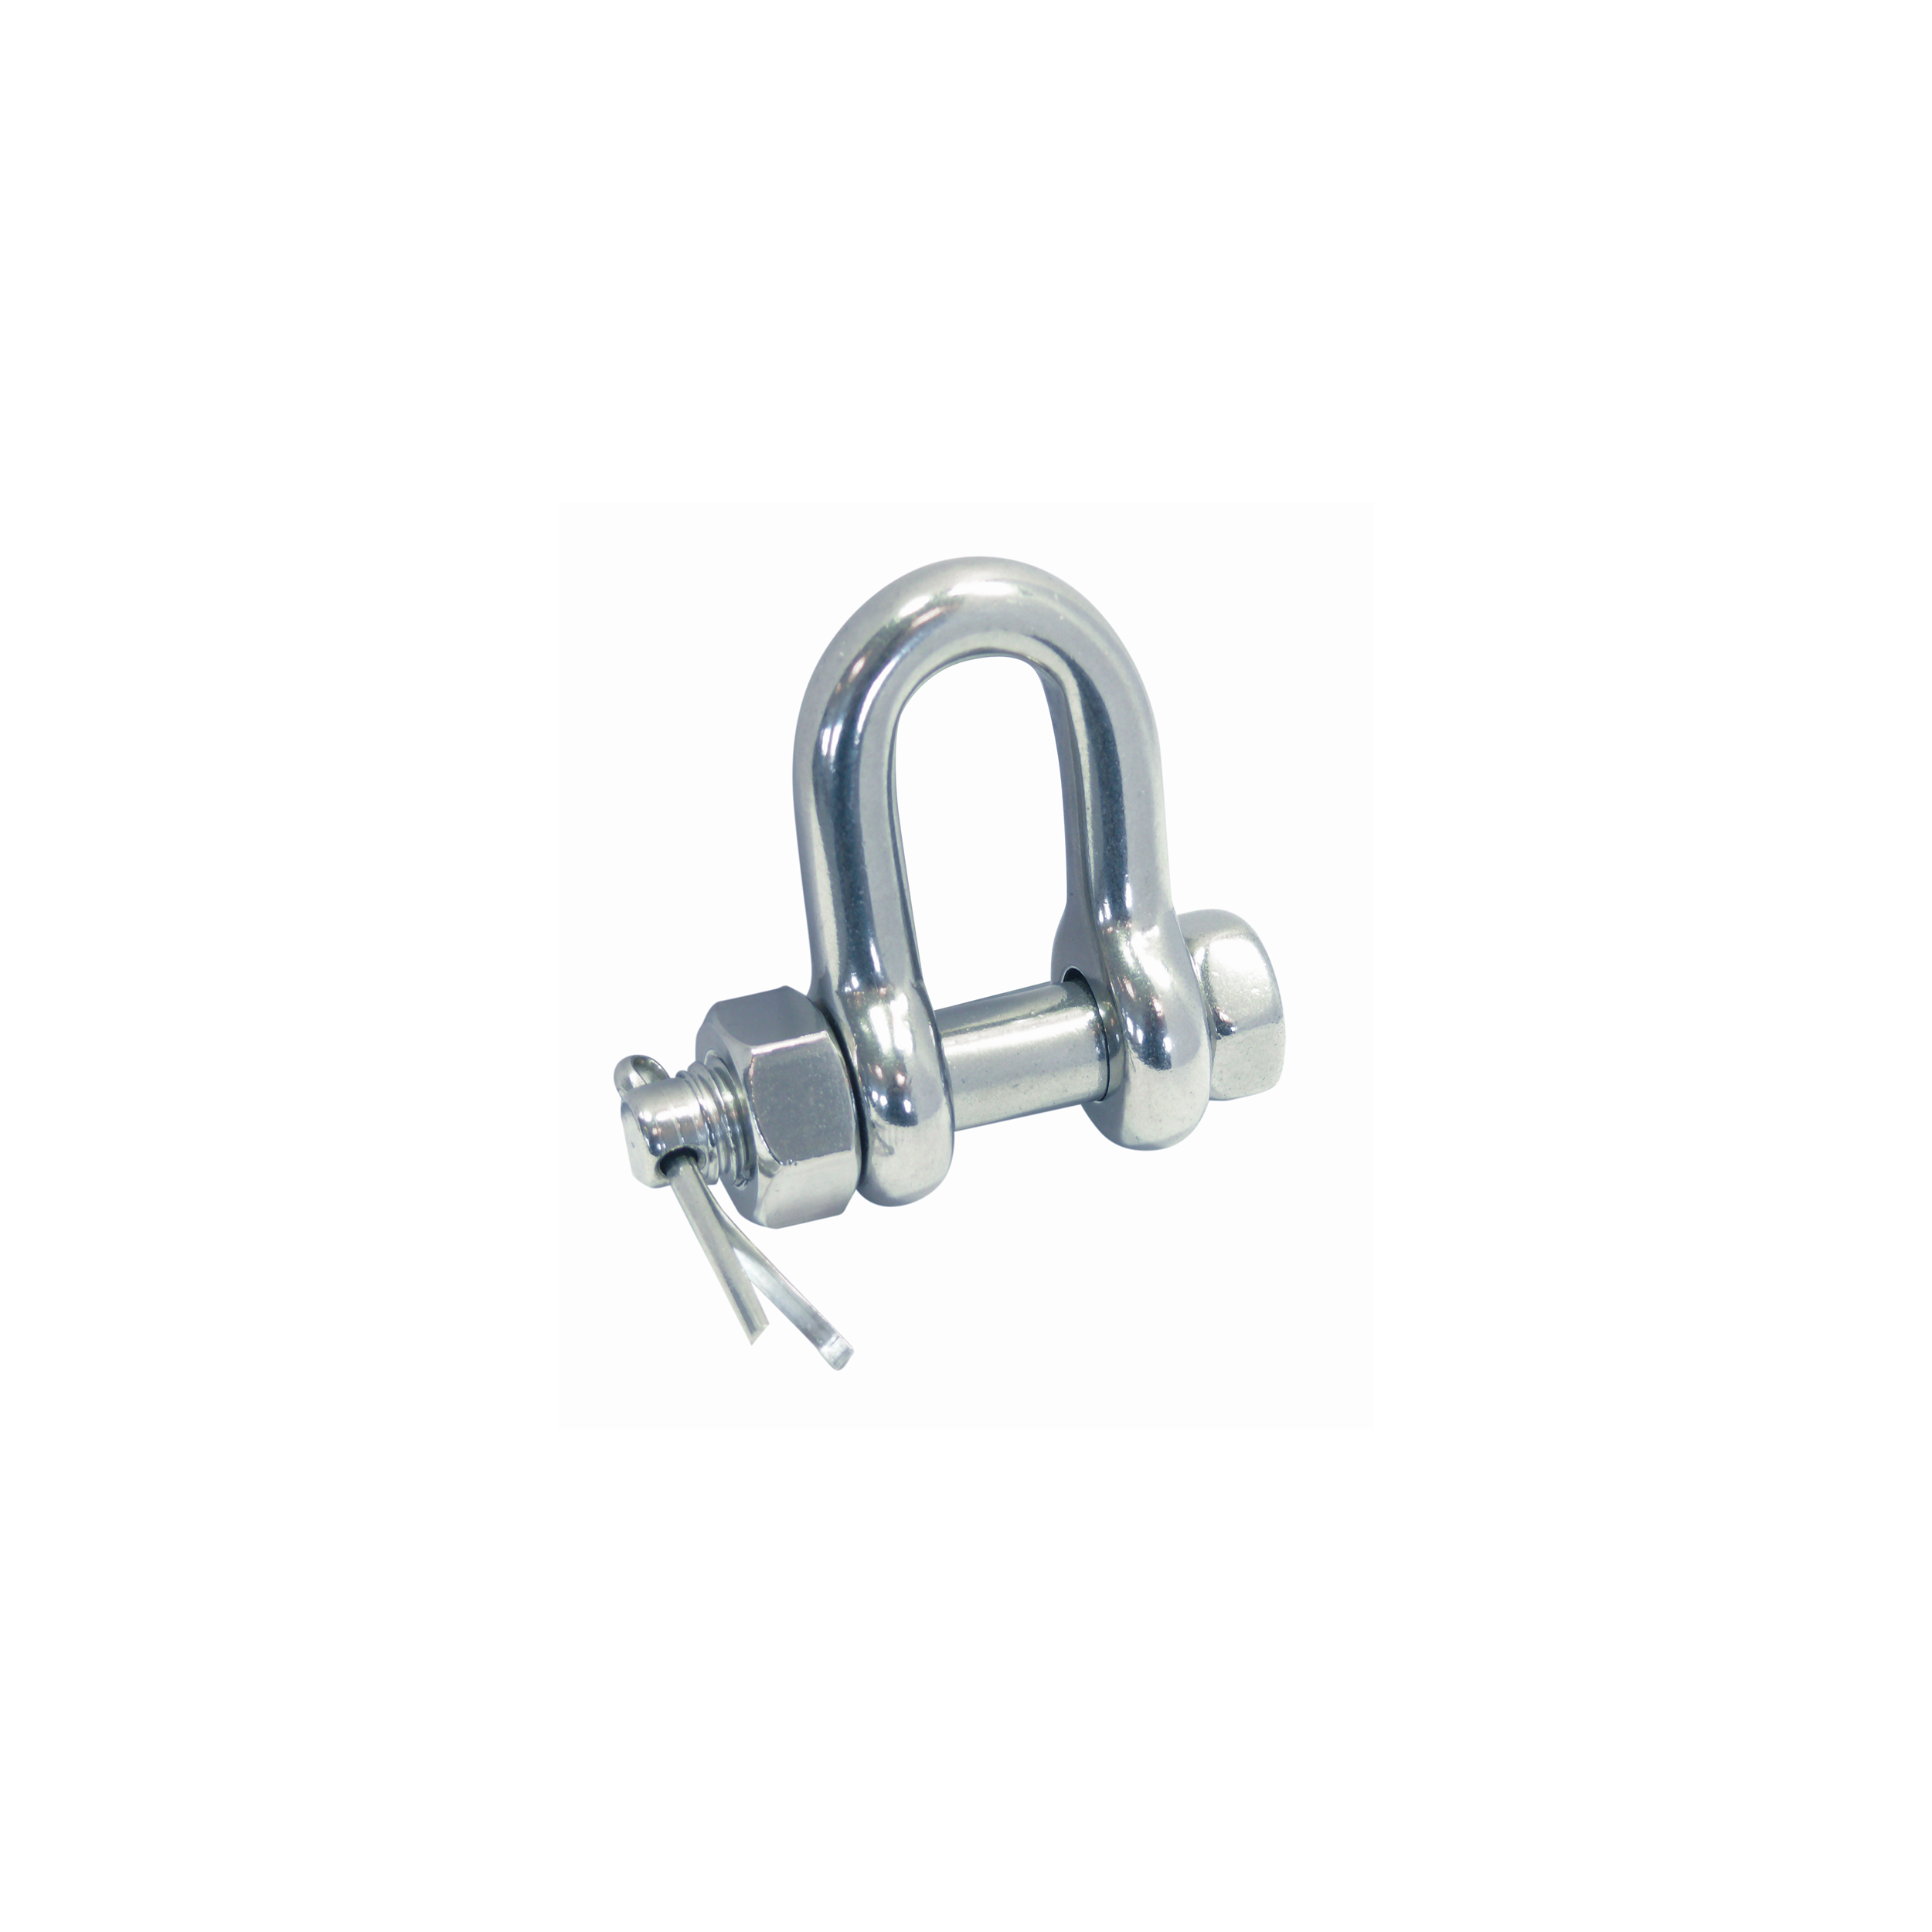 D-shackle with secure bolt A4  bolt 9.5mm, bow 8mm